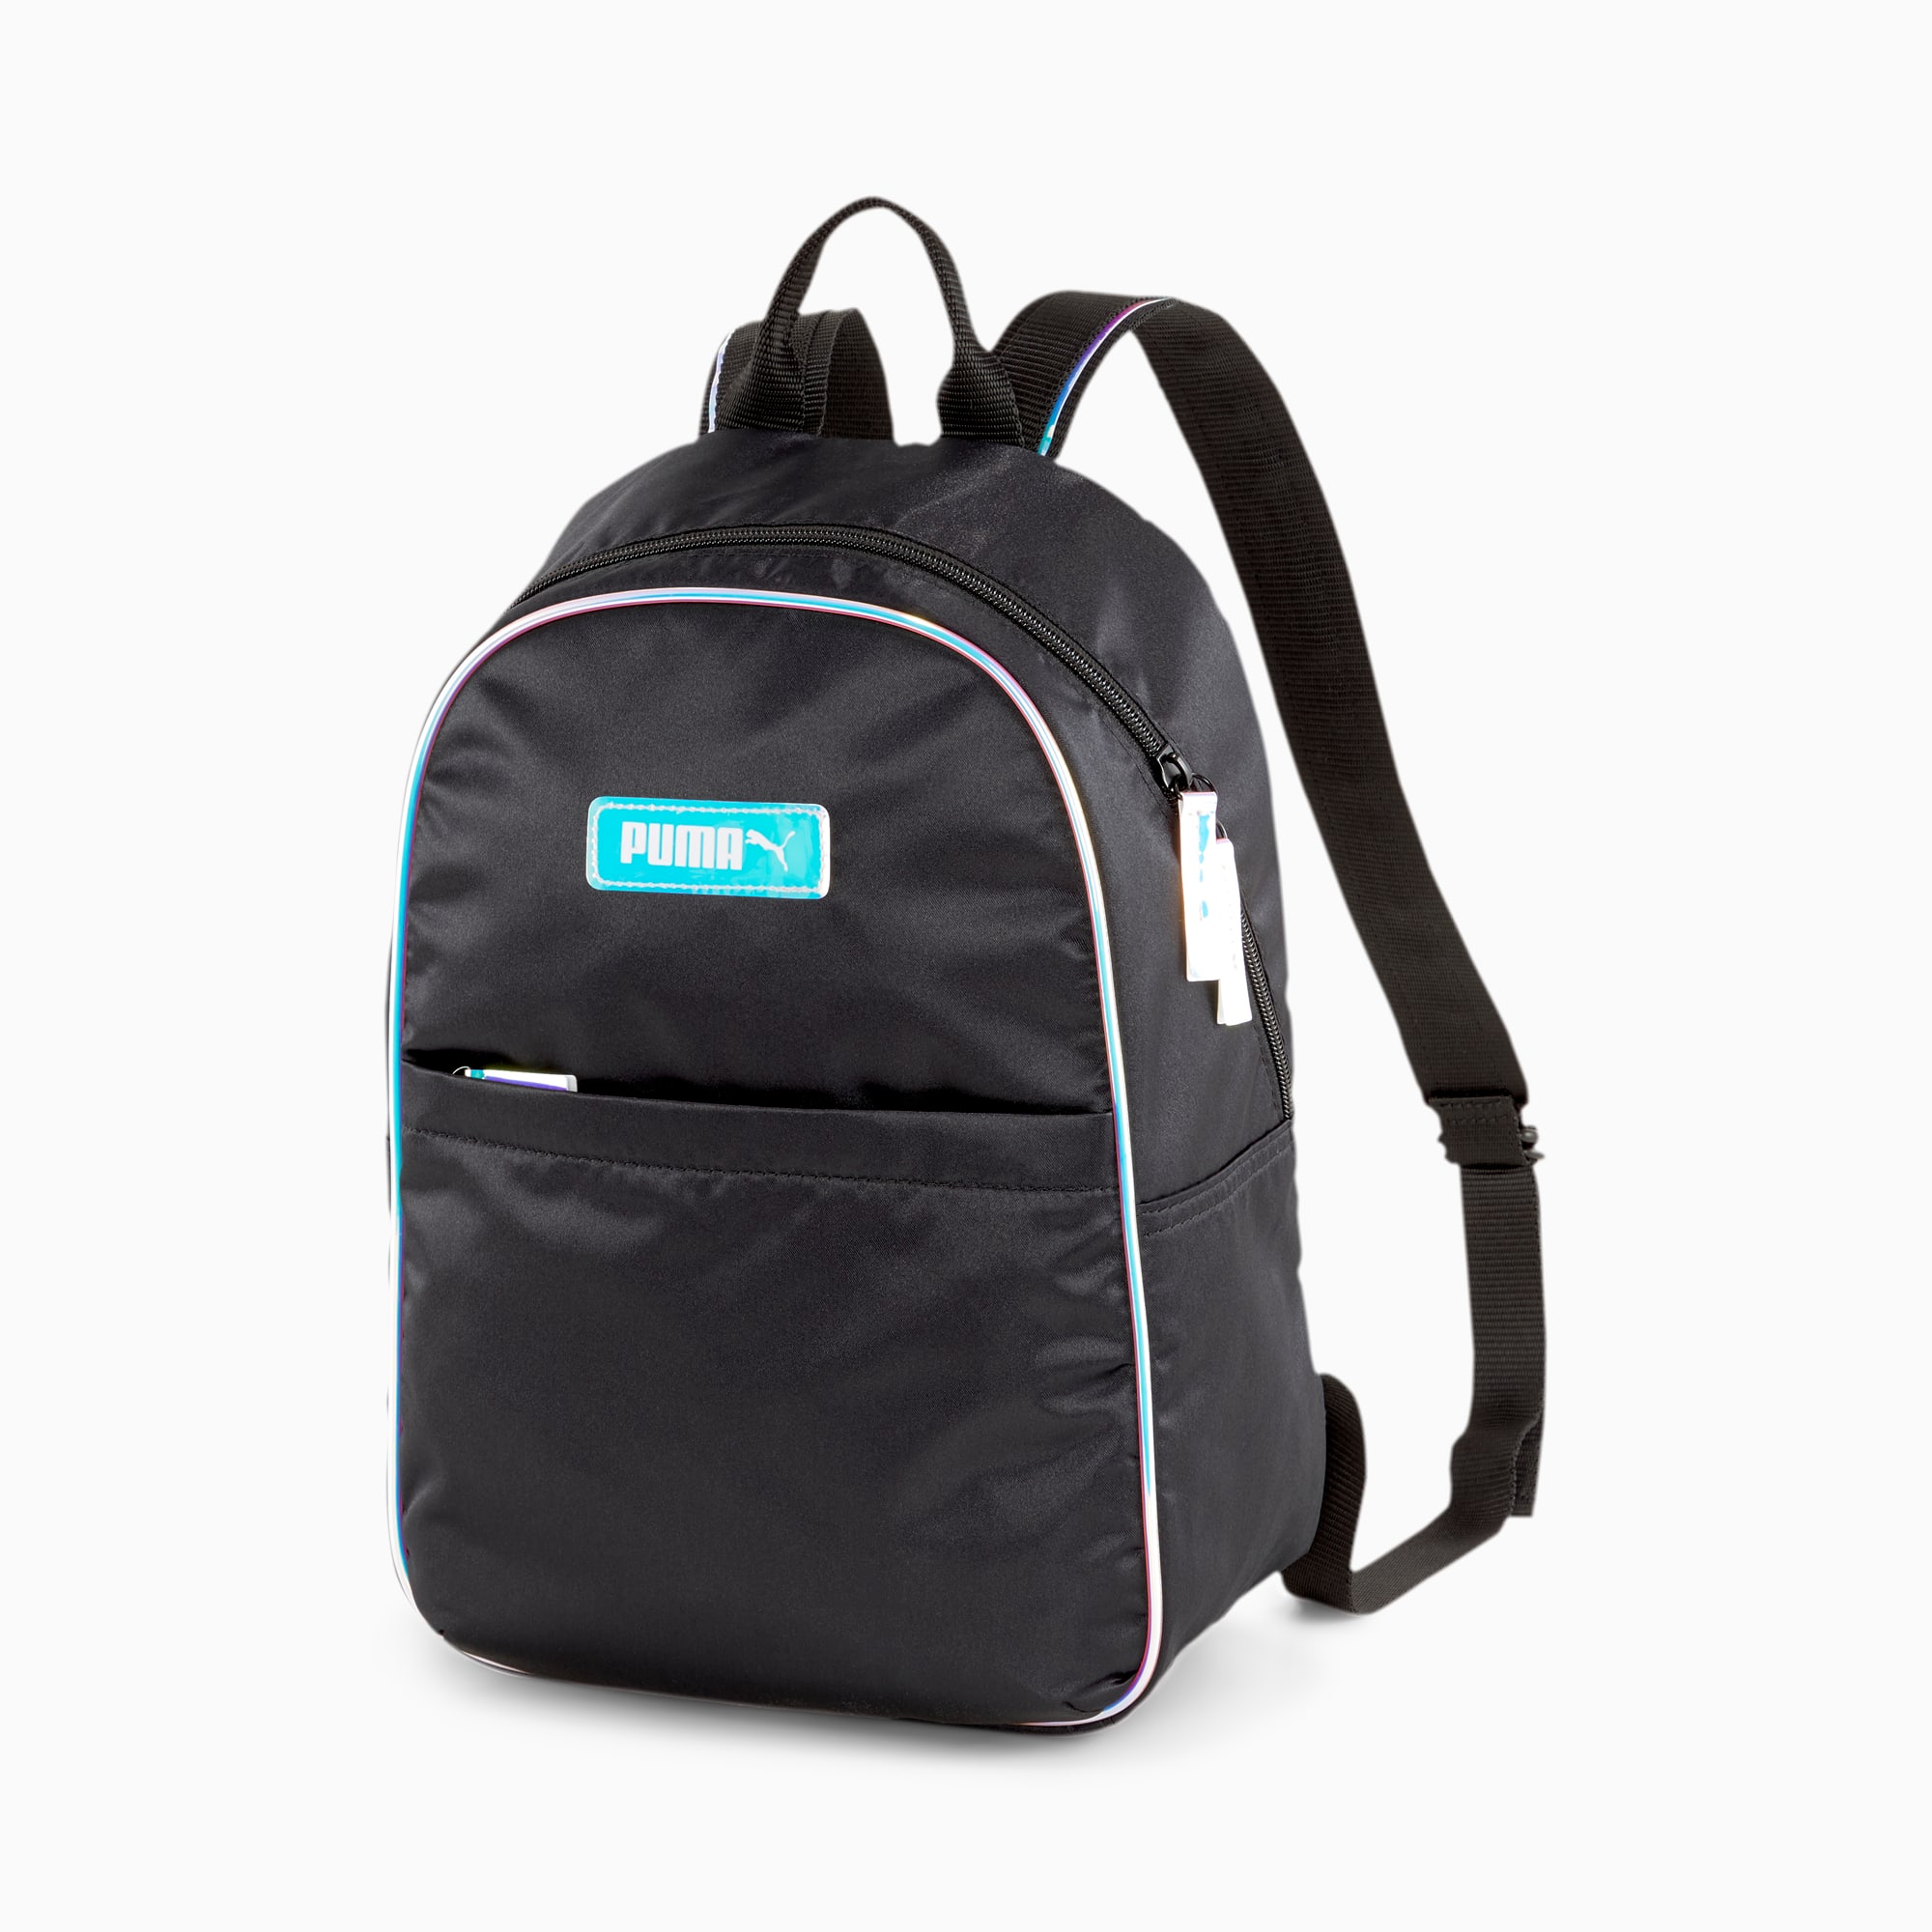 Prime Time Women's Backpack | Puma 